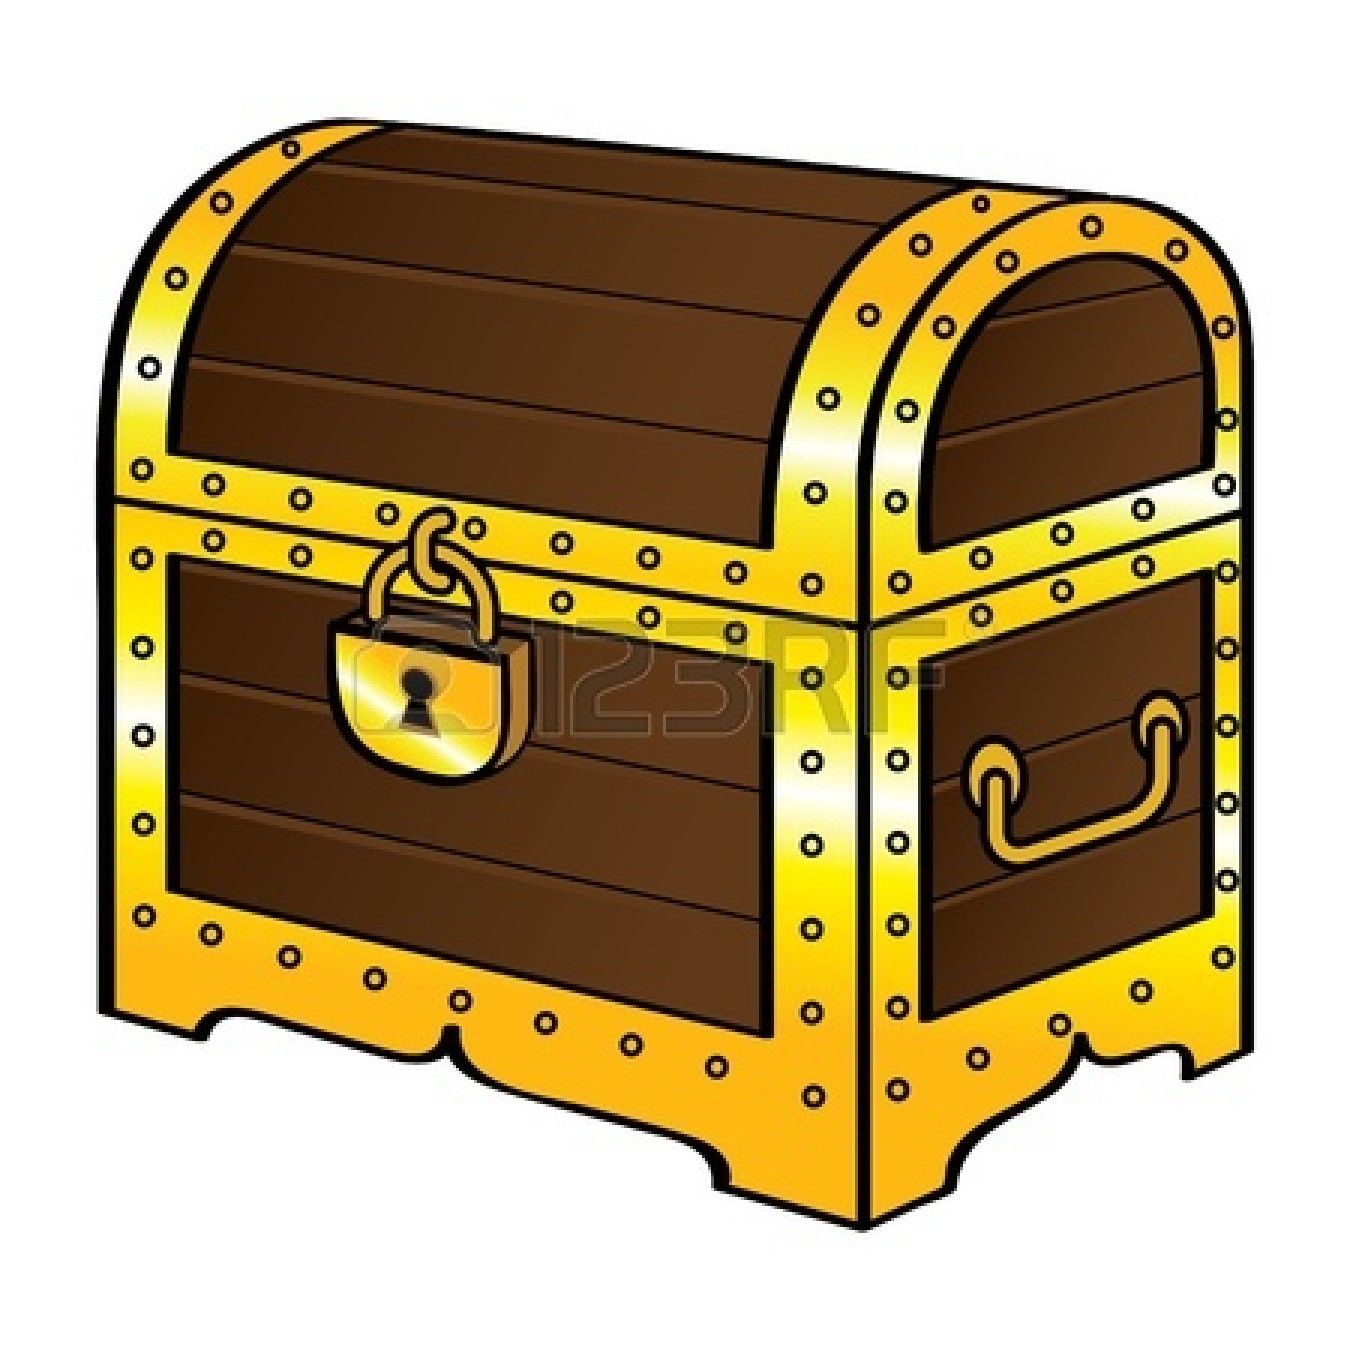 Treasure Chest Stock Vector Illustration And Royalty Free.